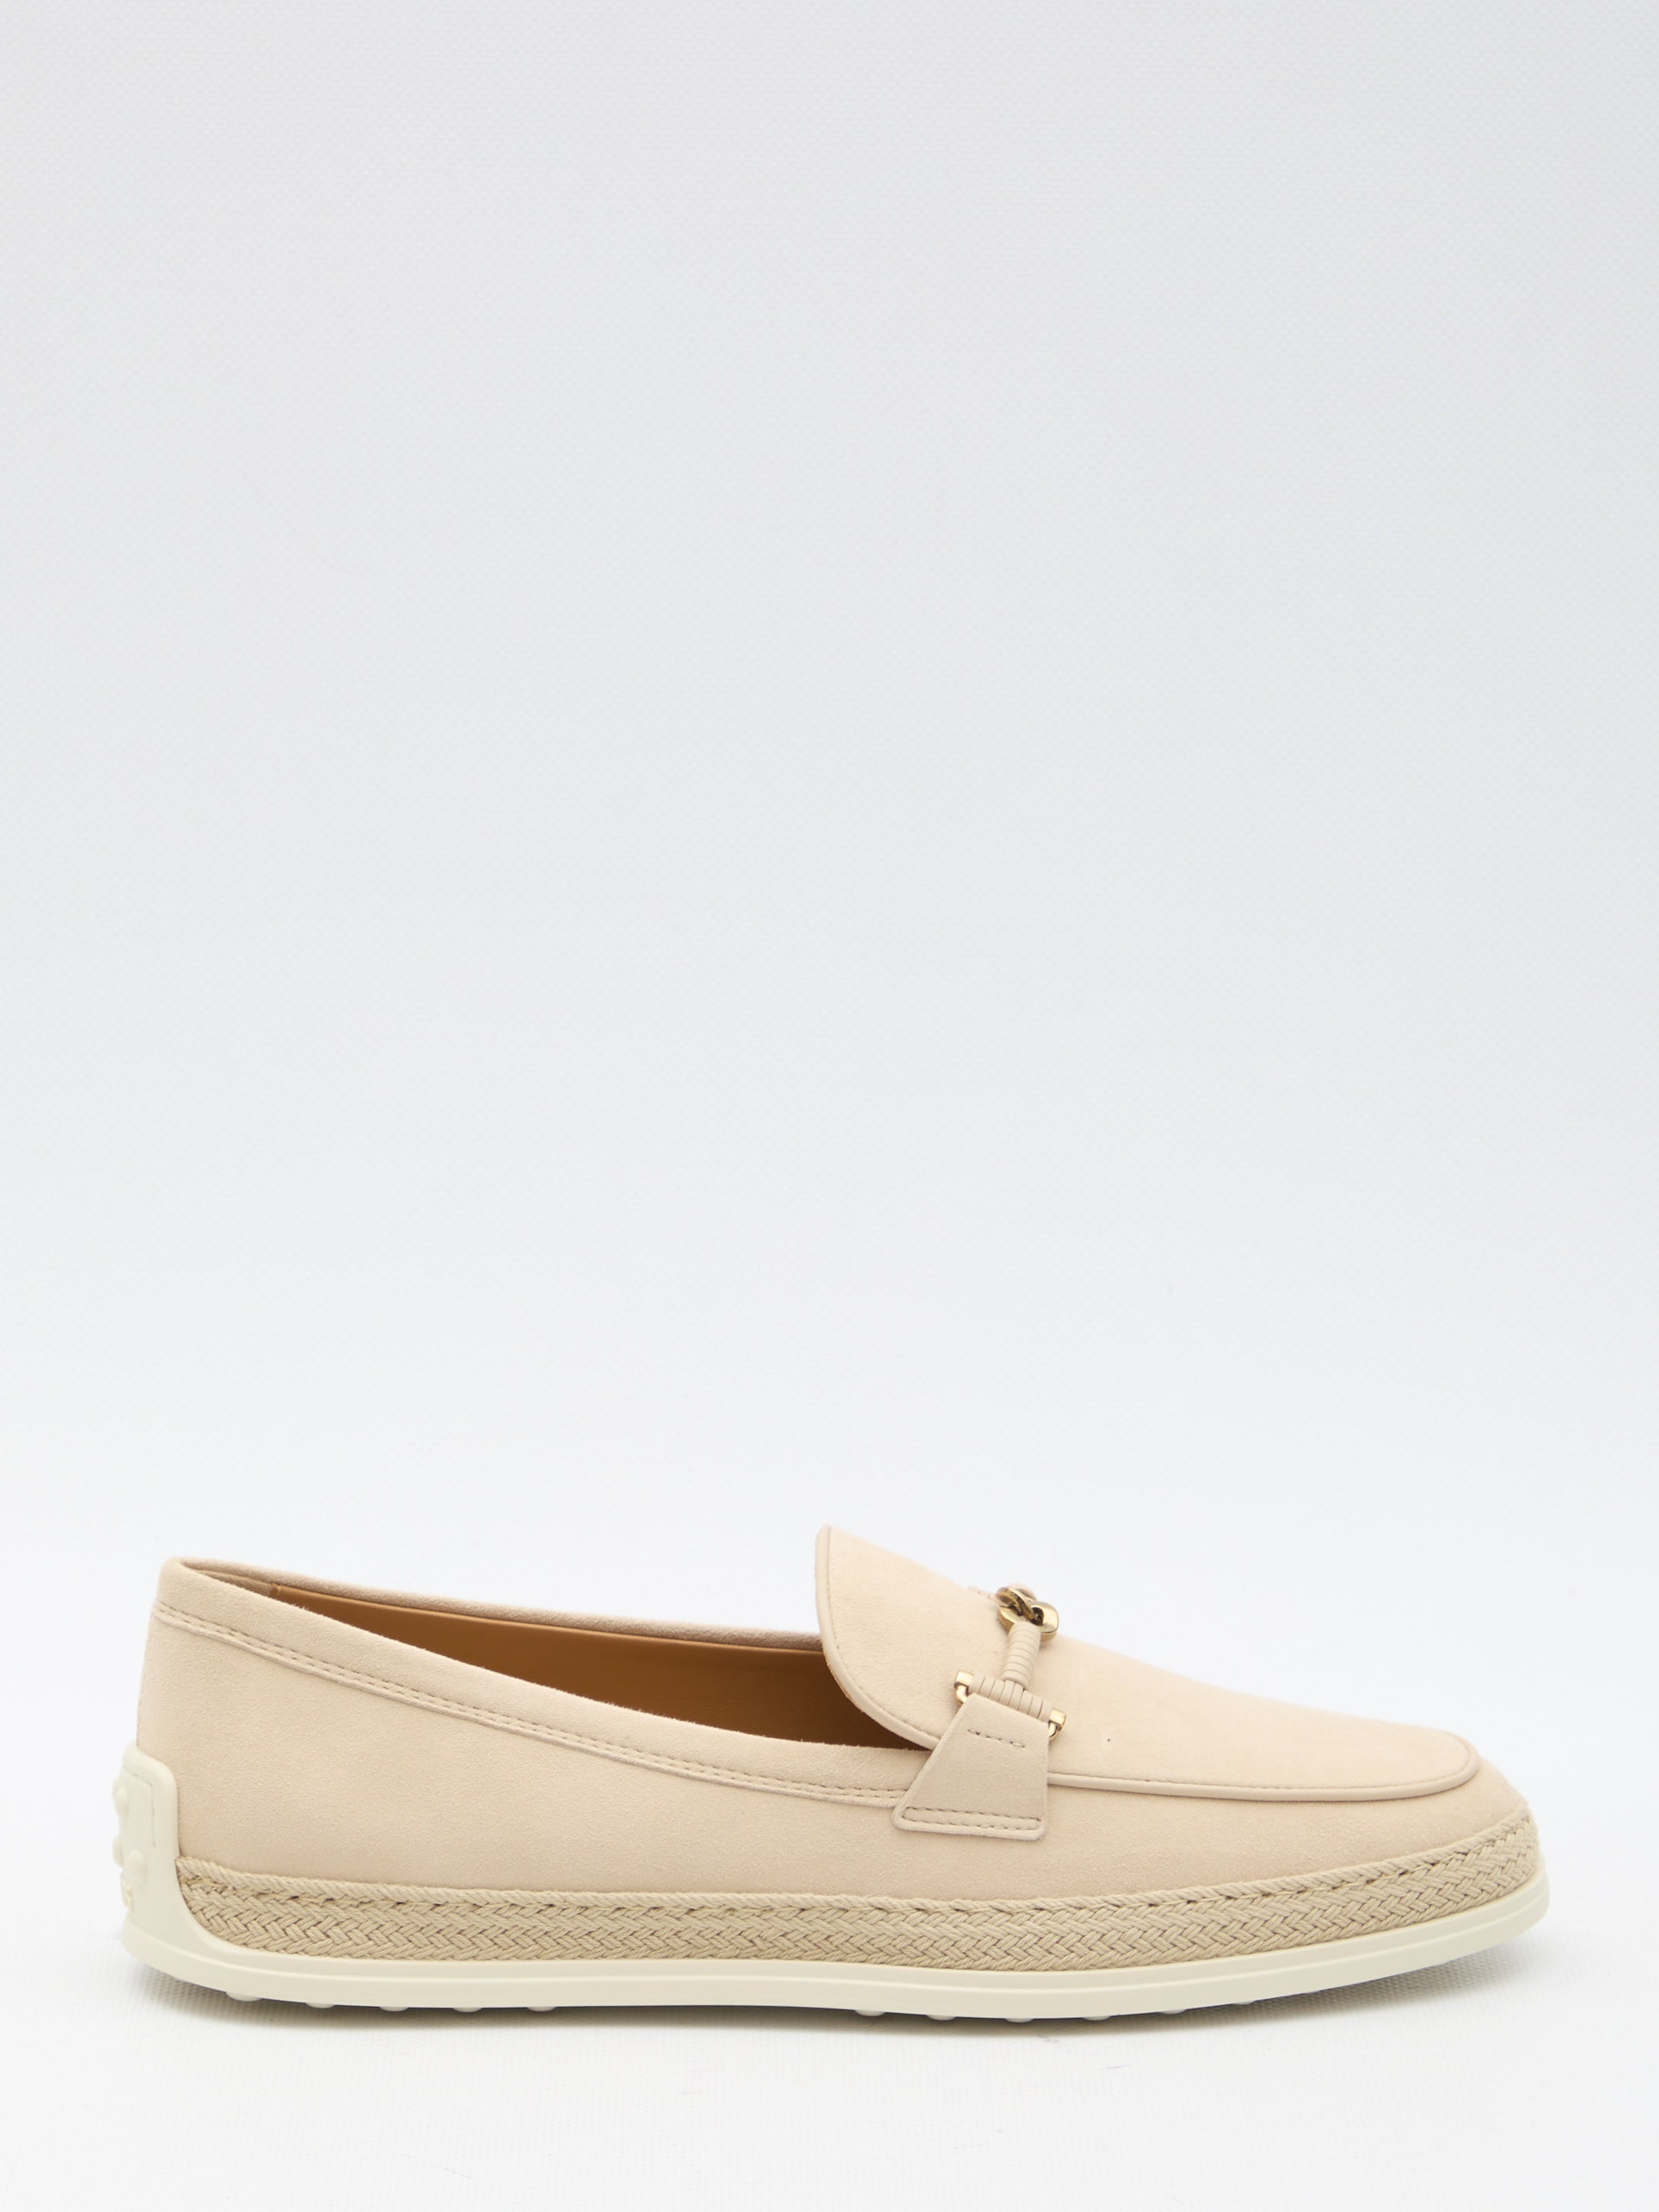 TODS-OUTLET-SALE-Suede-loafers-Flache-Schuhe-36-BEIGE-ARCHIVE-COLLECTION.jpg